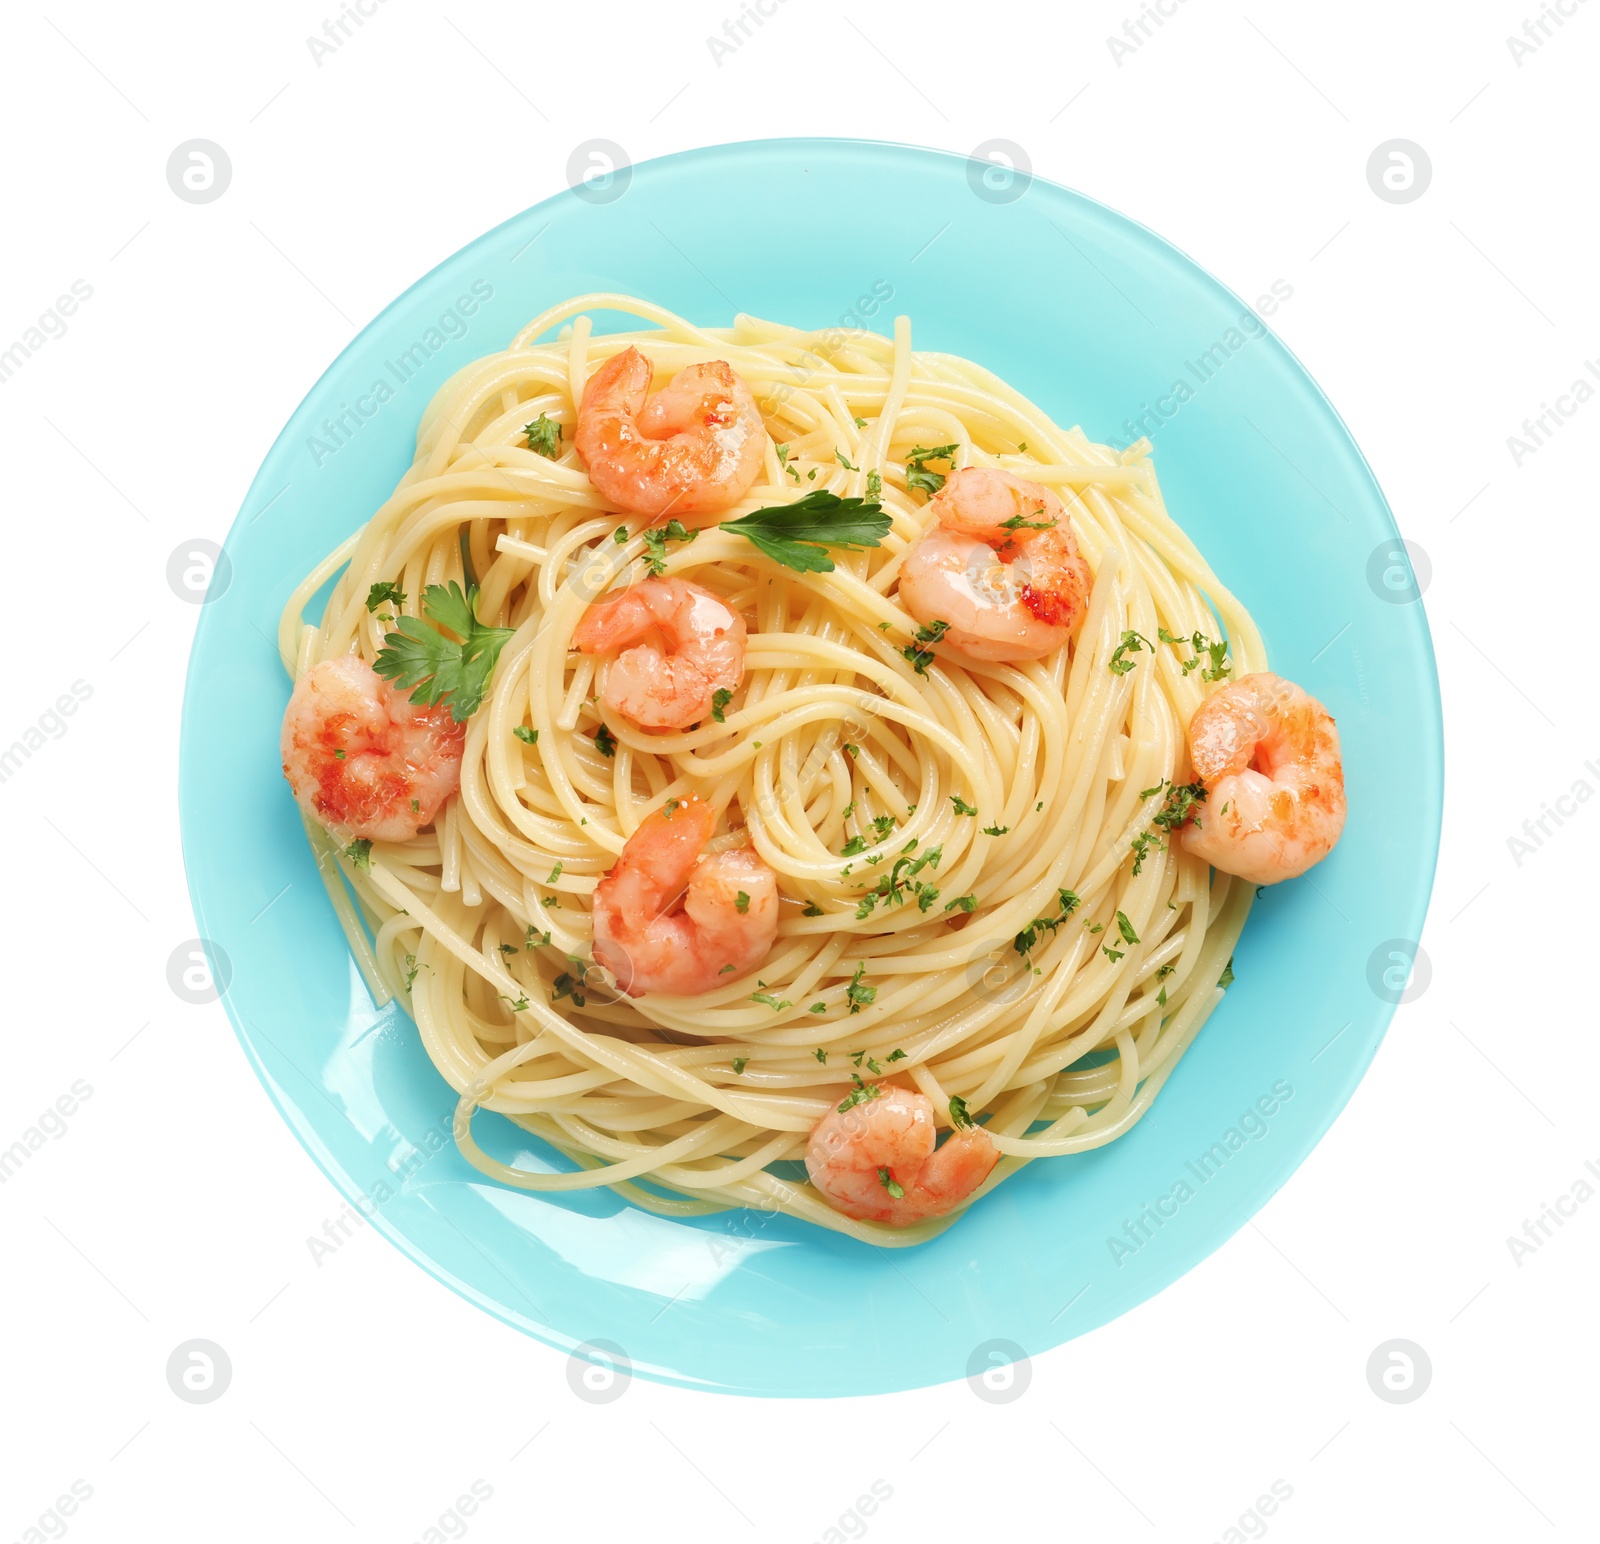 Photo of Plate with spaghetti and shrimps on white background, top view